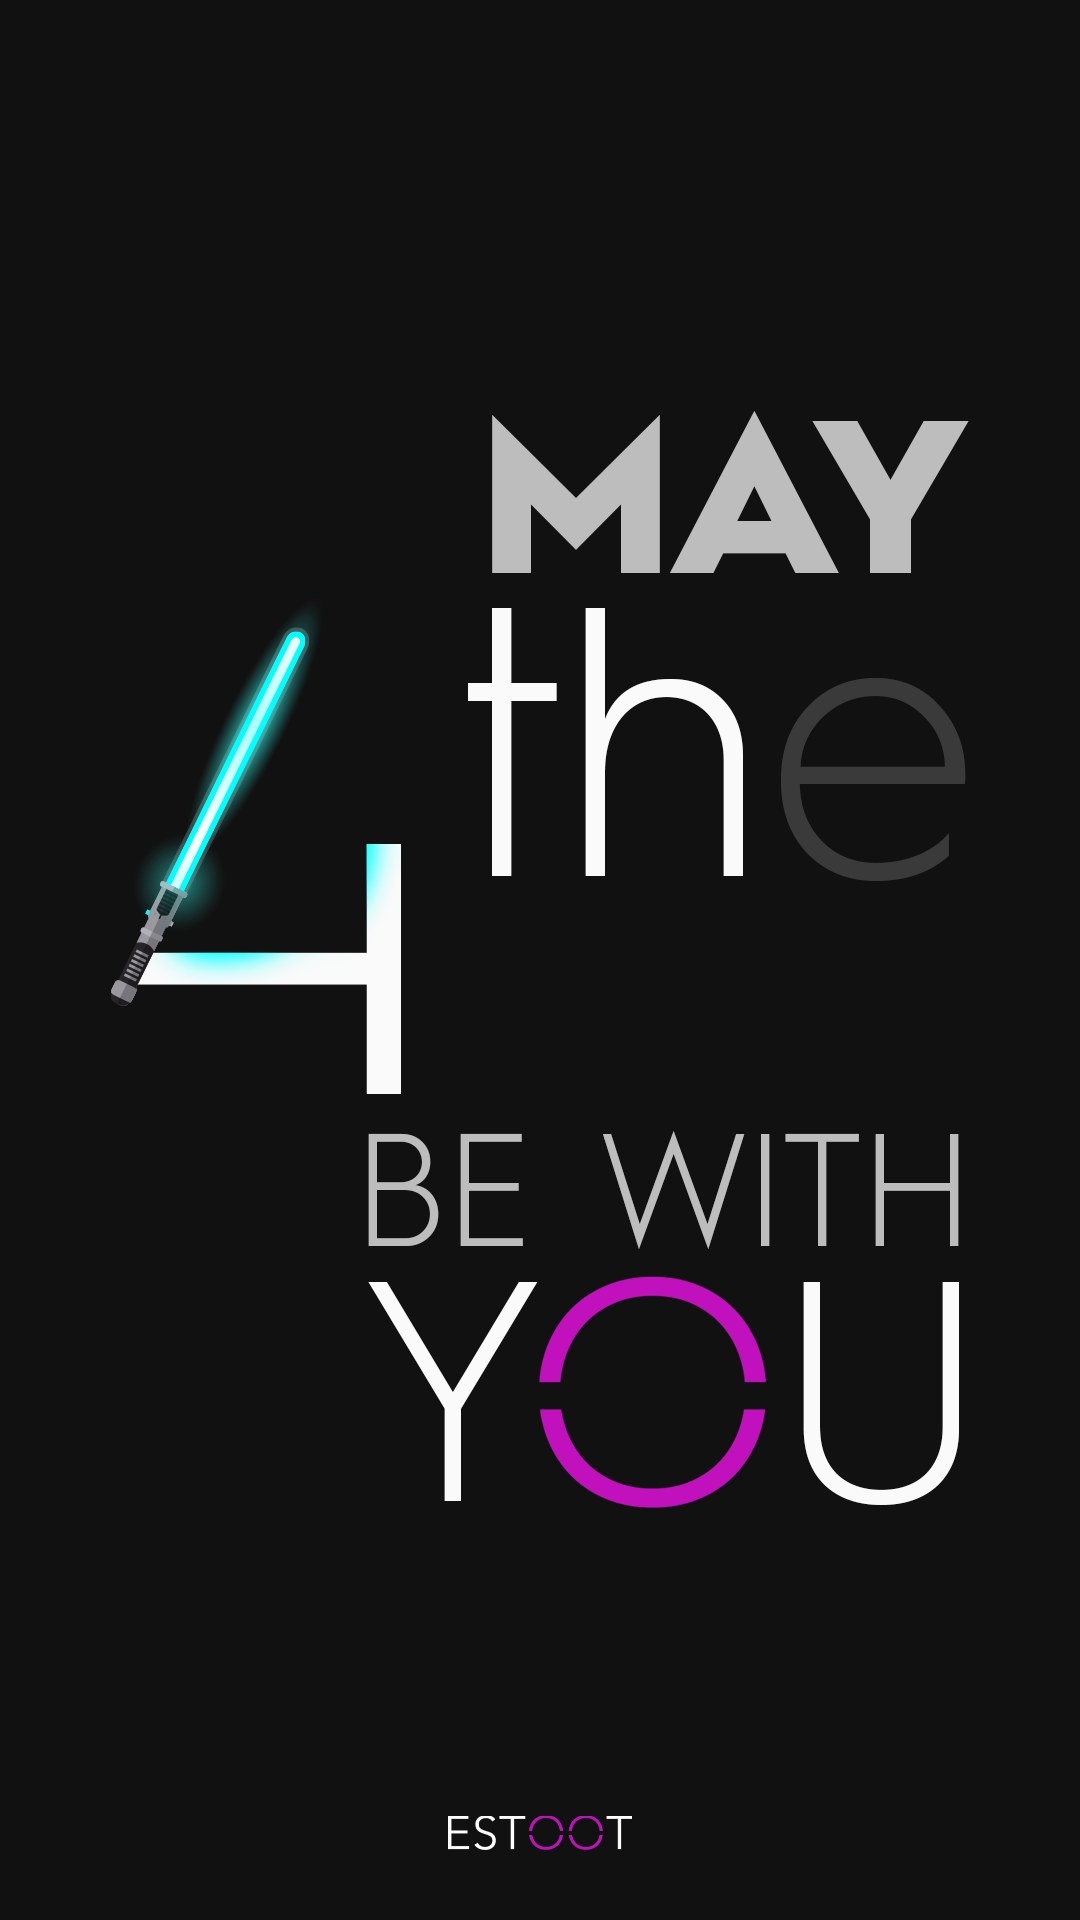 star wars Star Wars Day may the 4th may the fourth black hole estoot red vs blue War donut kid donut